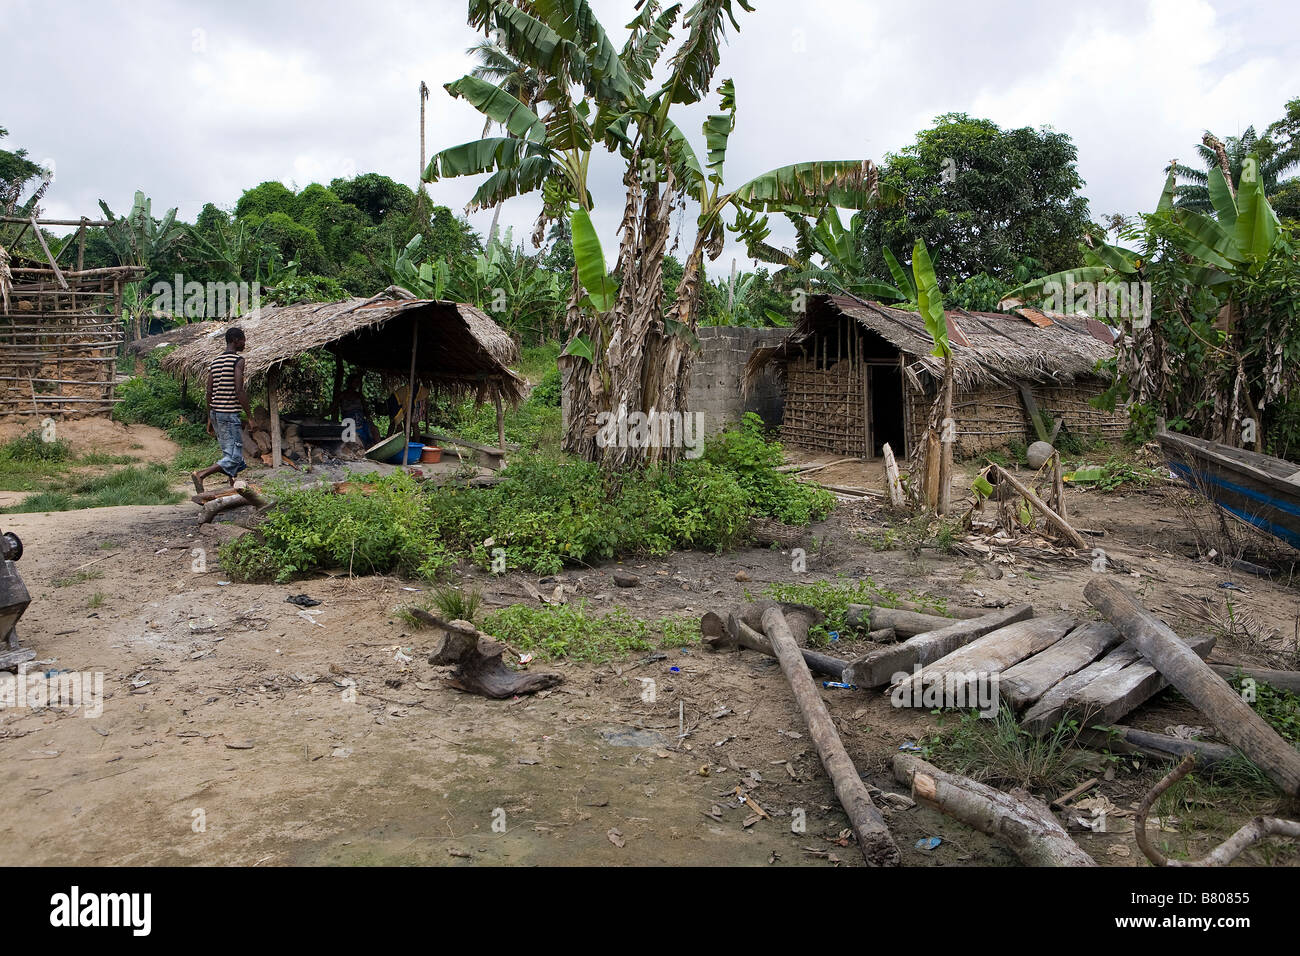 A pile of scrap wood lay on the ground in front of wattle and daub houses in a remote stormy jungle village of Nigeria Stock Photo